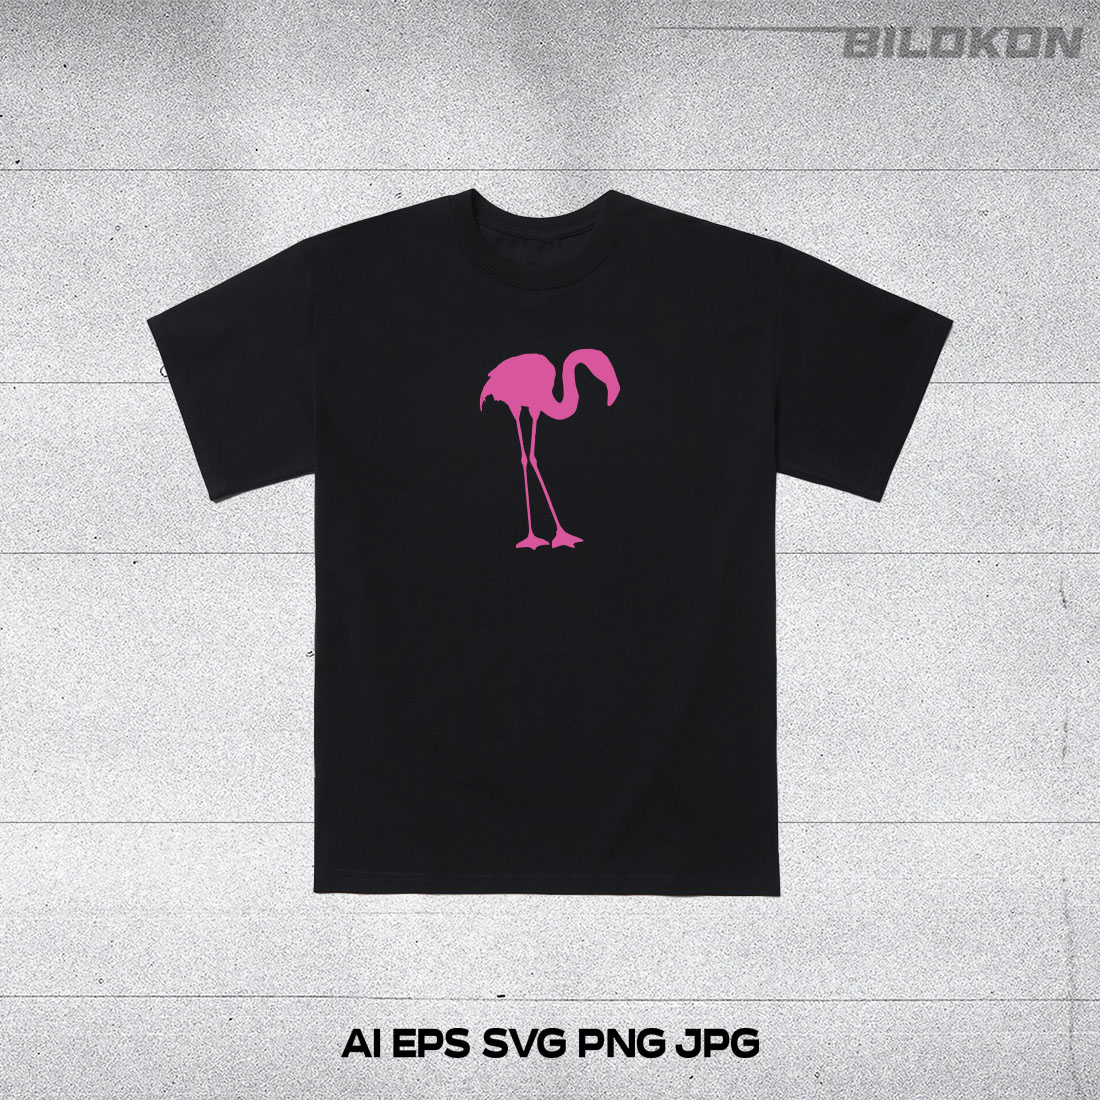 Black shirt with a pink flamingo on it.